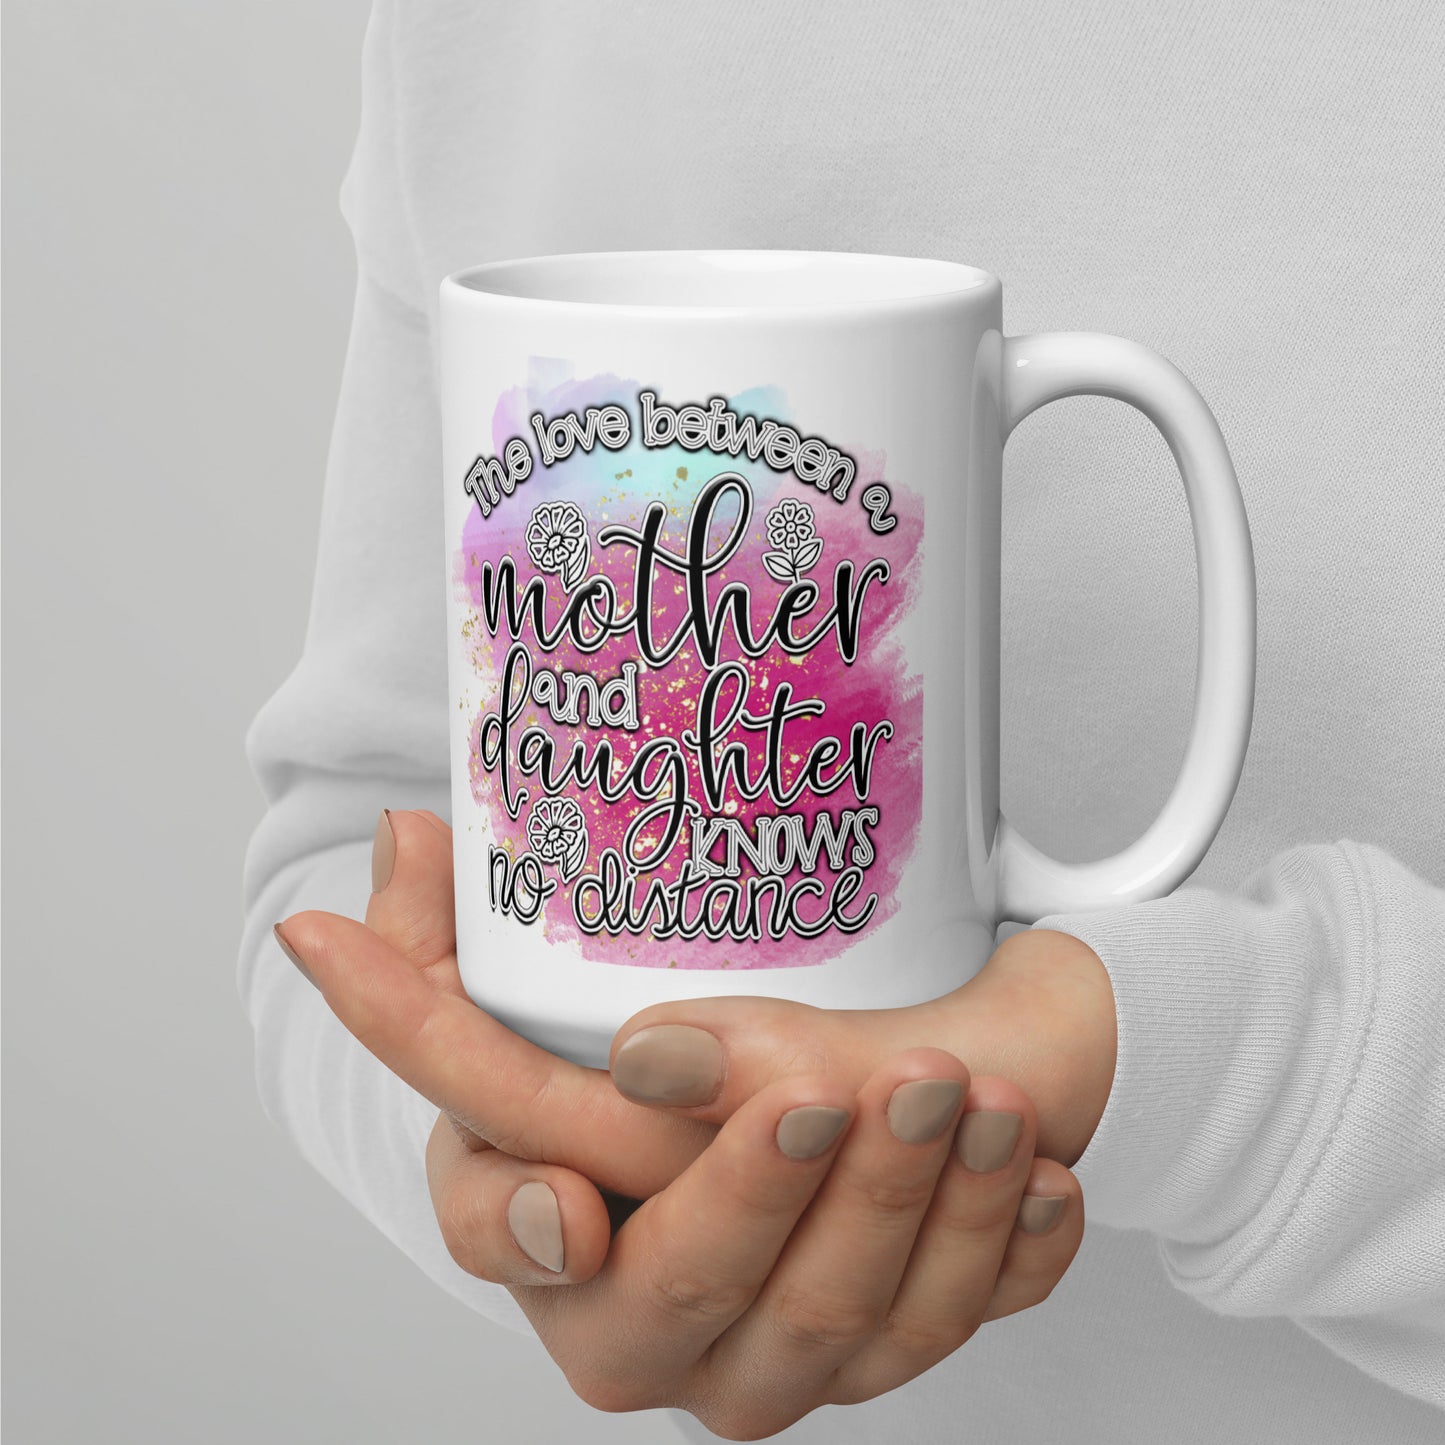 The Love Between Mother and Daughter Mug